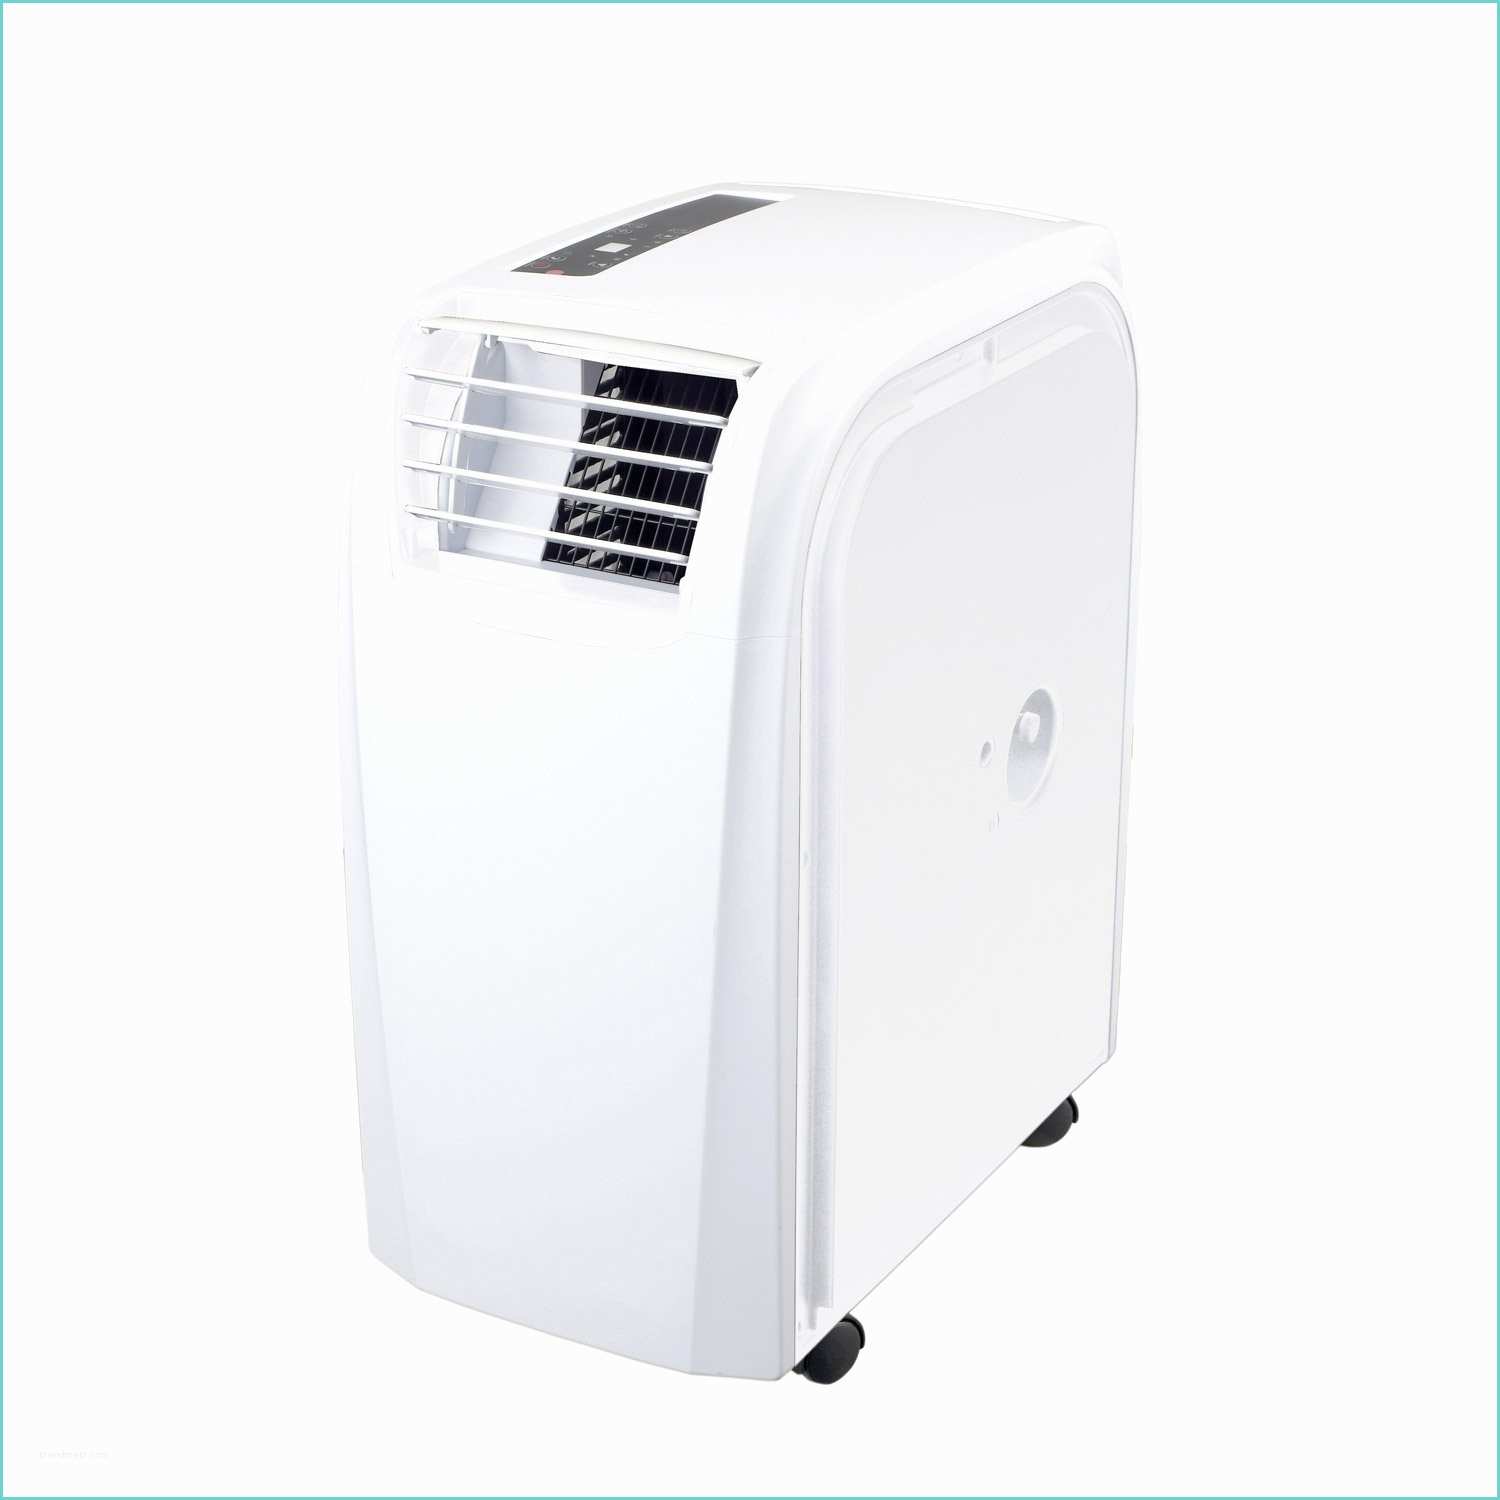 Climatiseur Mobile Leroy Merlin Climatiseur Mobile Réversible Equation In & Out 2600 W